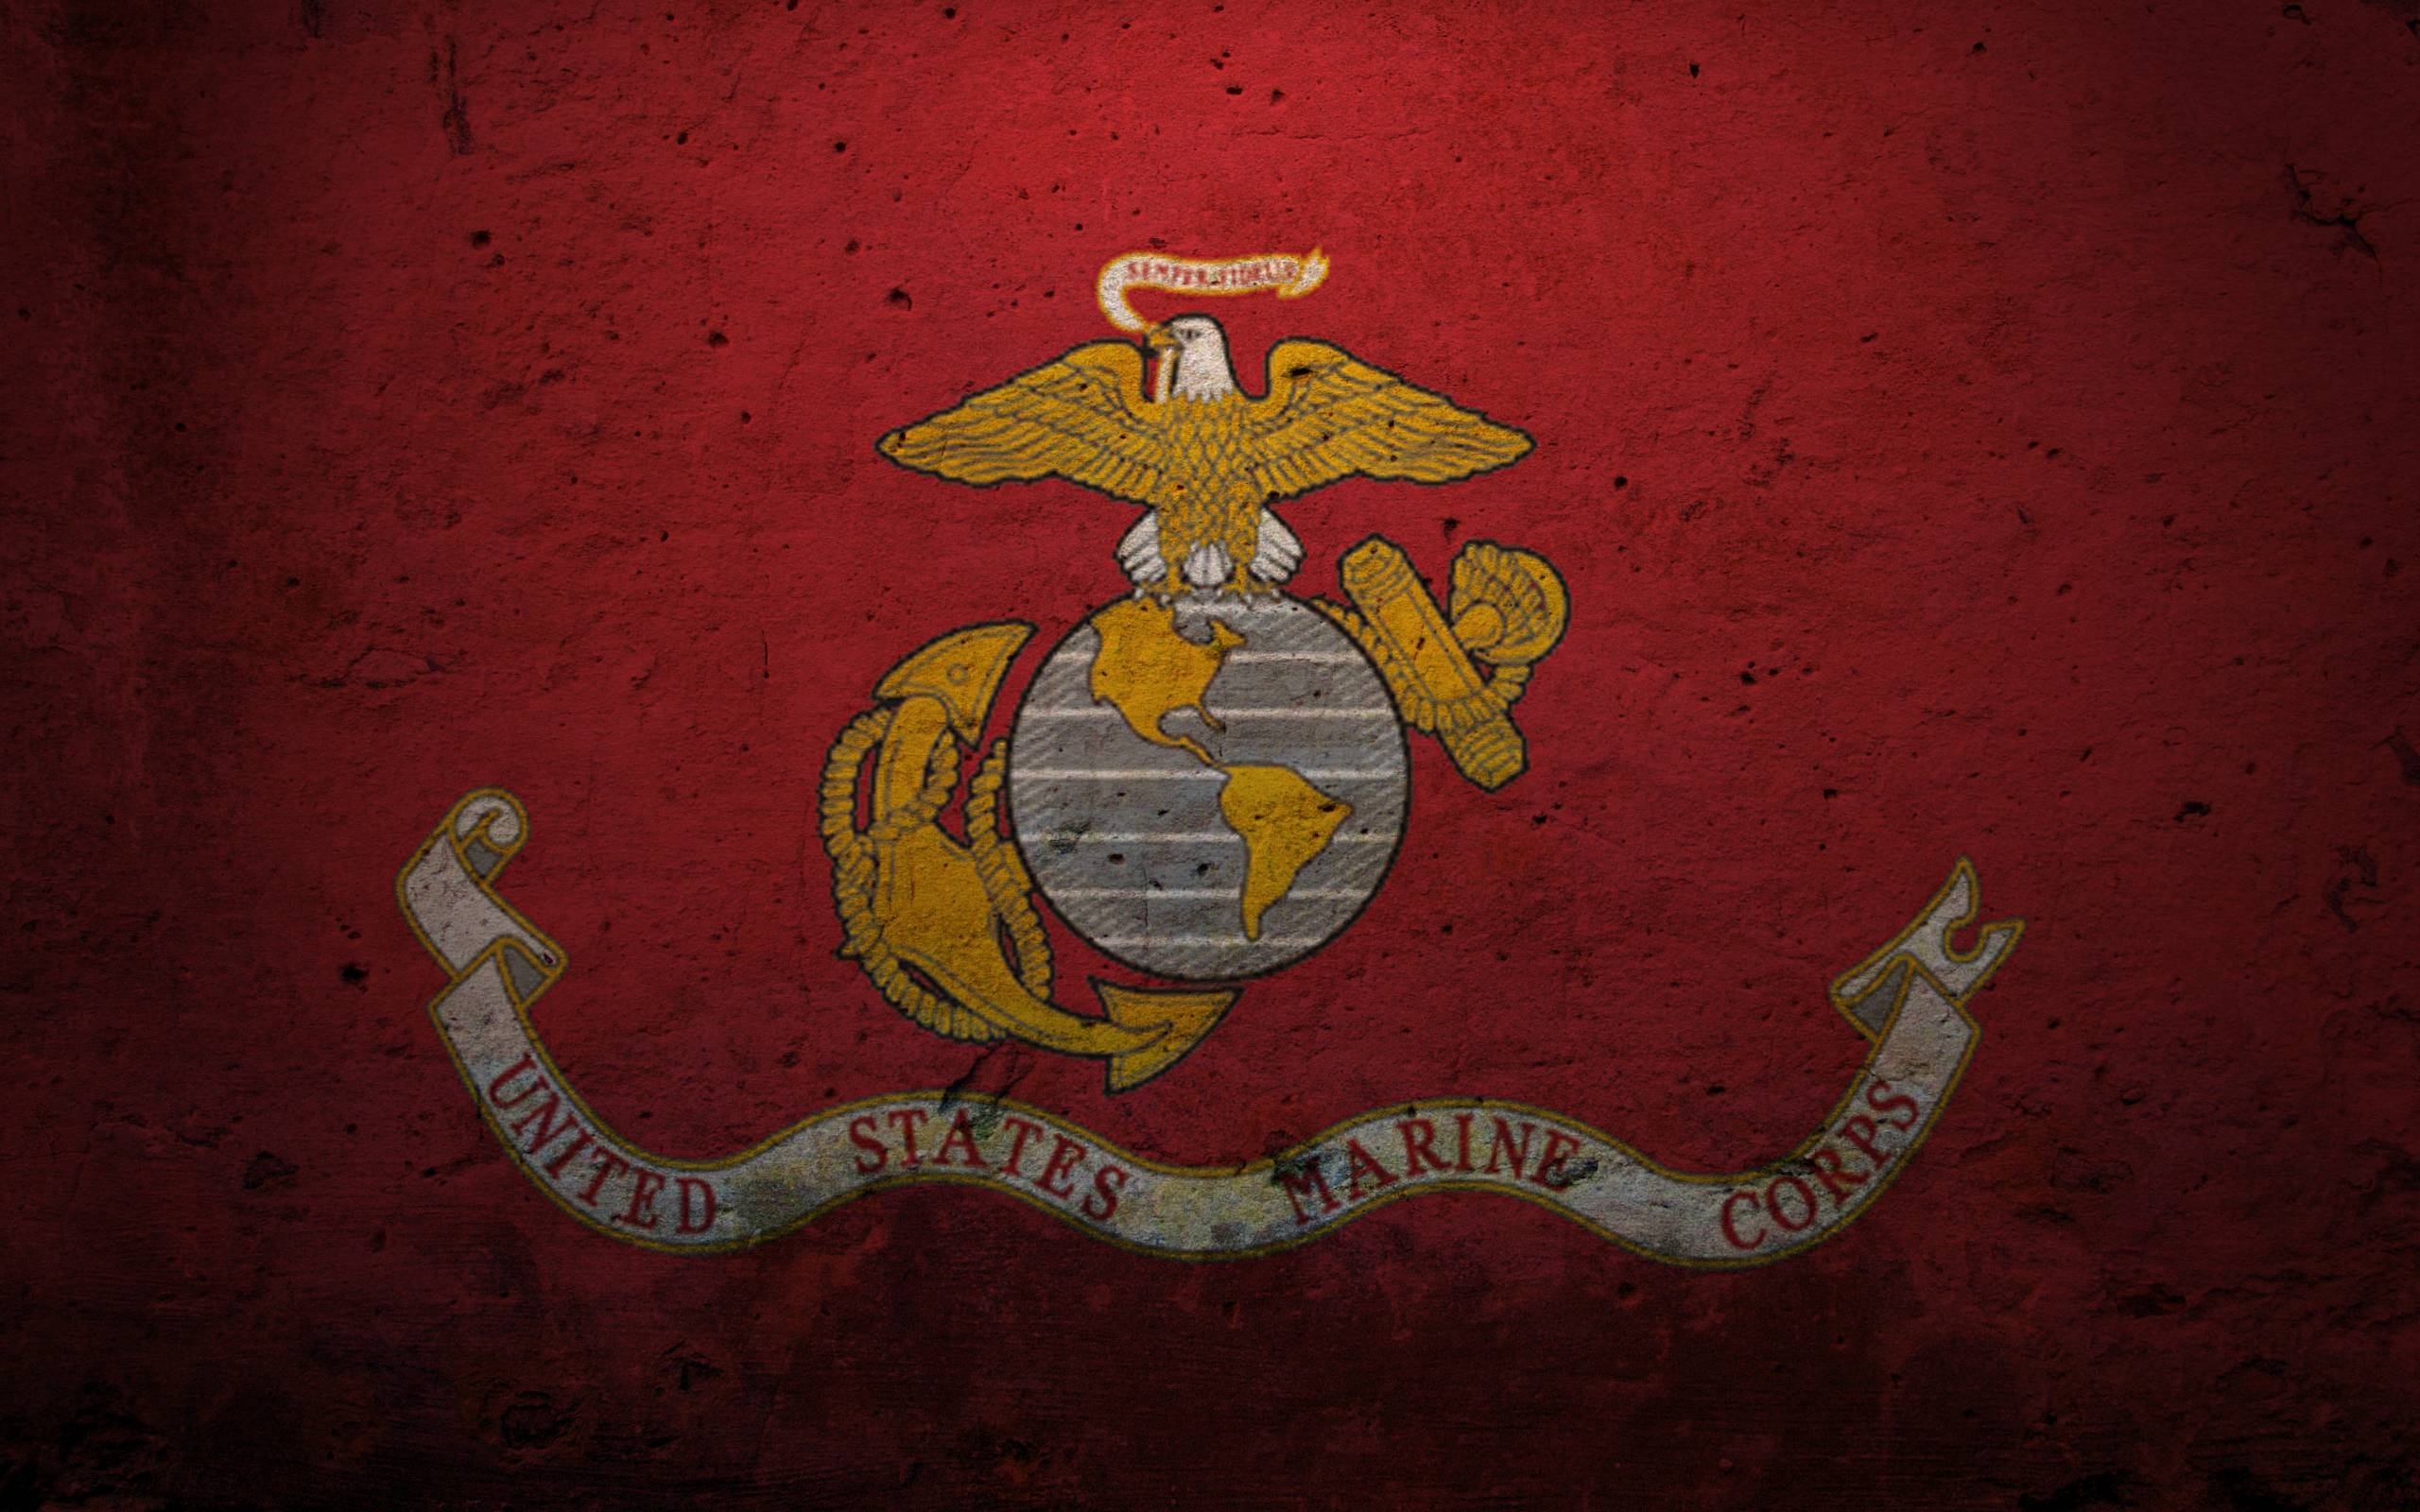 10 New United States Marine Corps Wallpaper FULL HD 1080p For PC Desktop